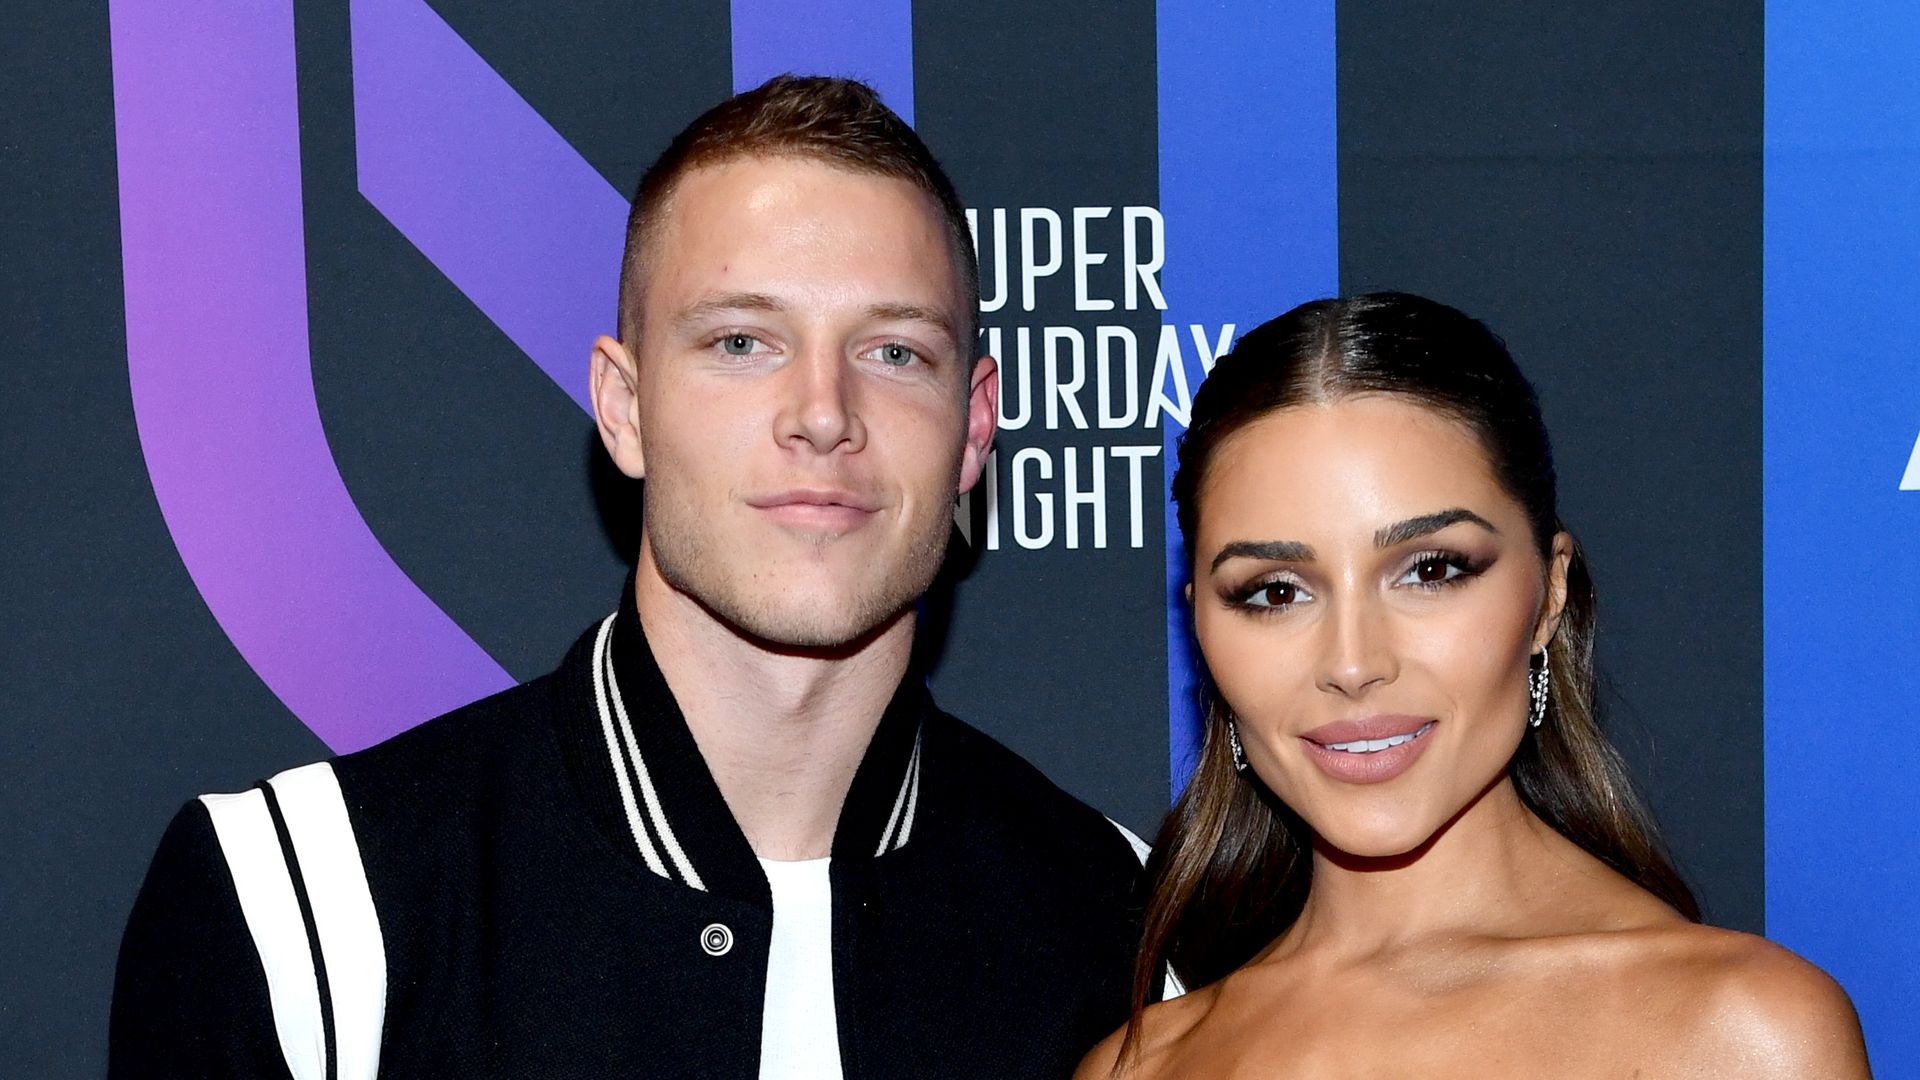 Model Olivia Culpo and NFL Player Christian McCaffrey are engaged. The couple announced the news on social media.